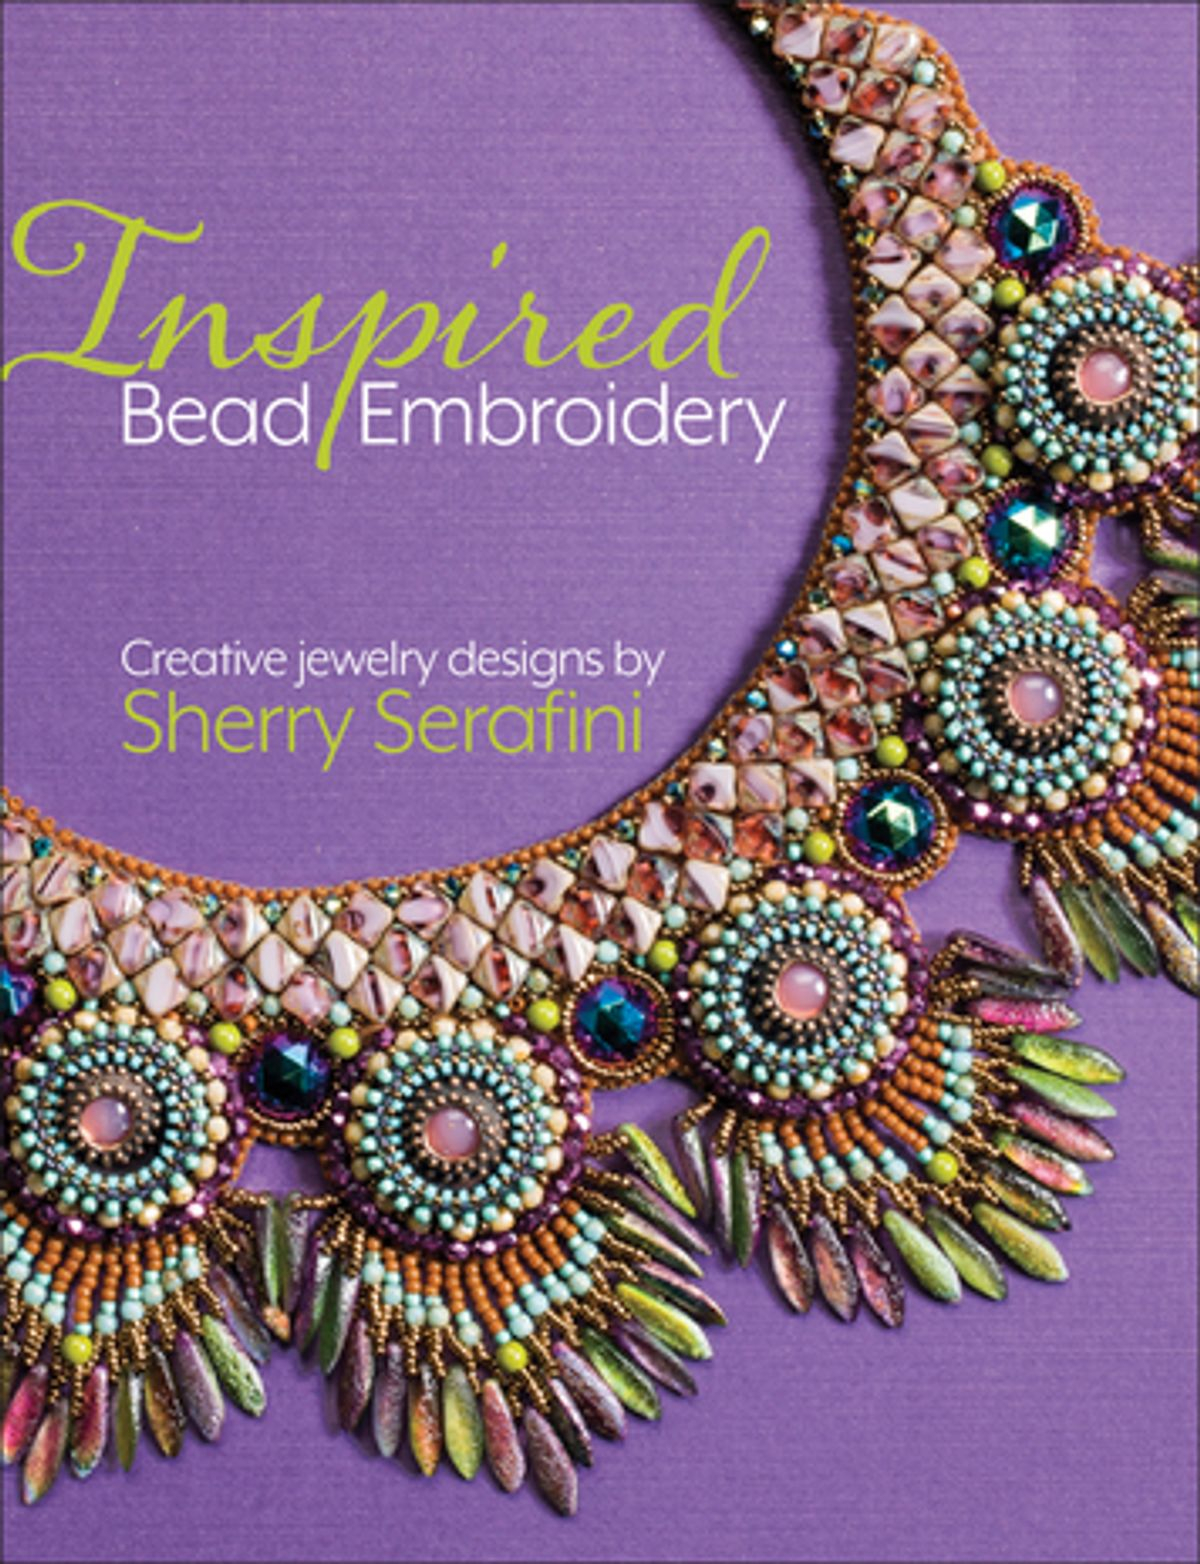 Bead Embroidery Jewelry Patterns Inspired Bead Embroidery New Jewelry Designs Sherry Serafini